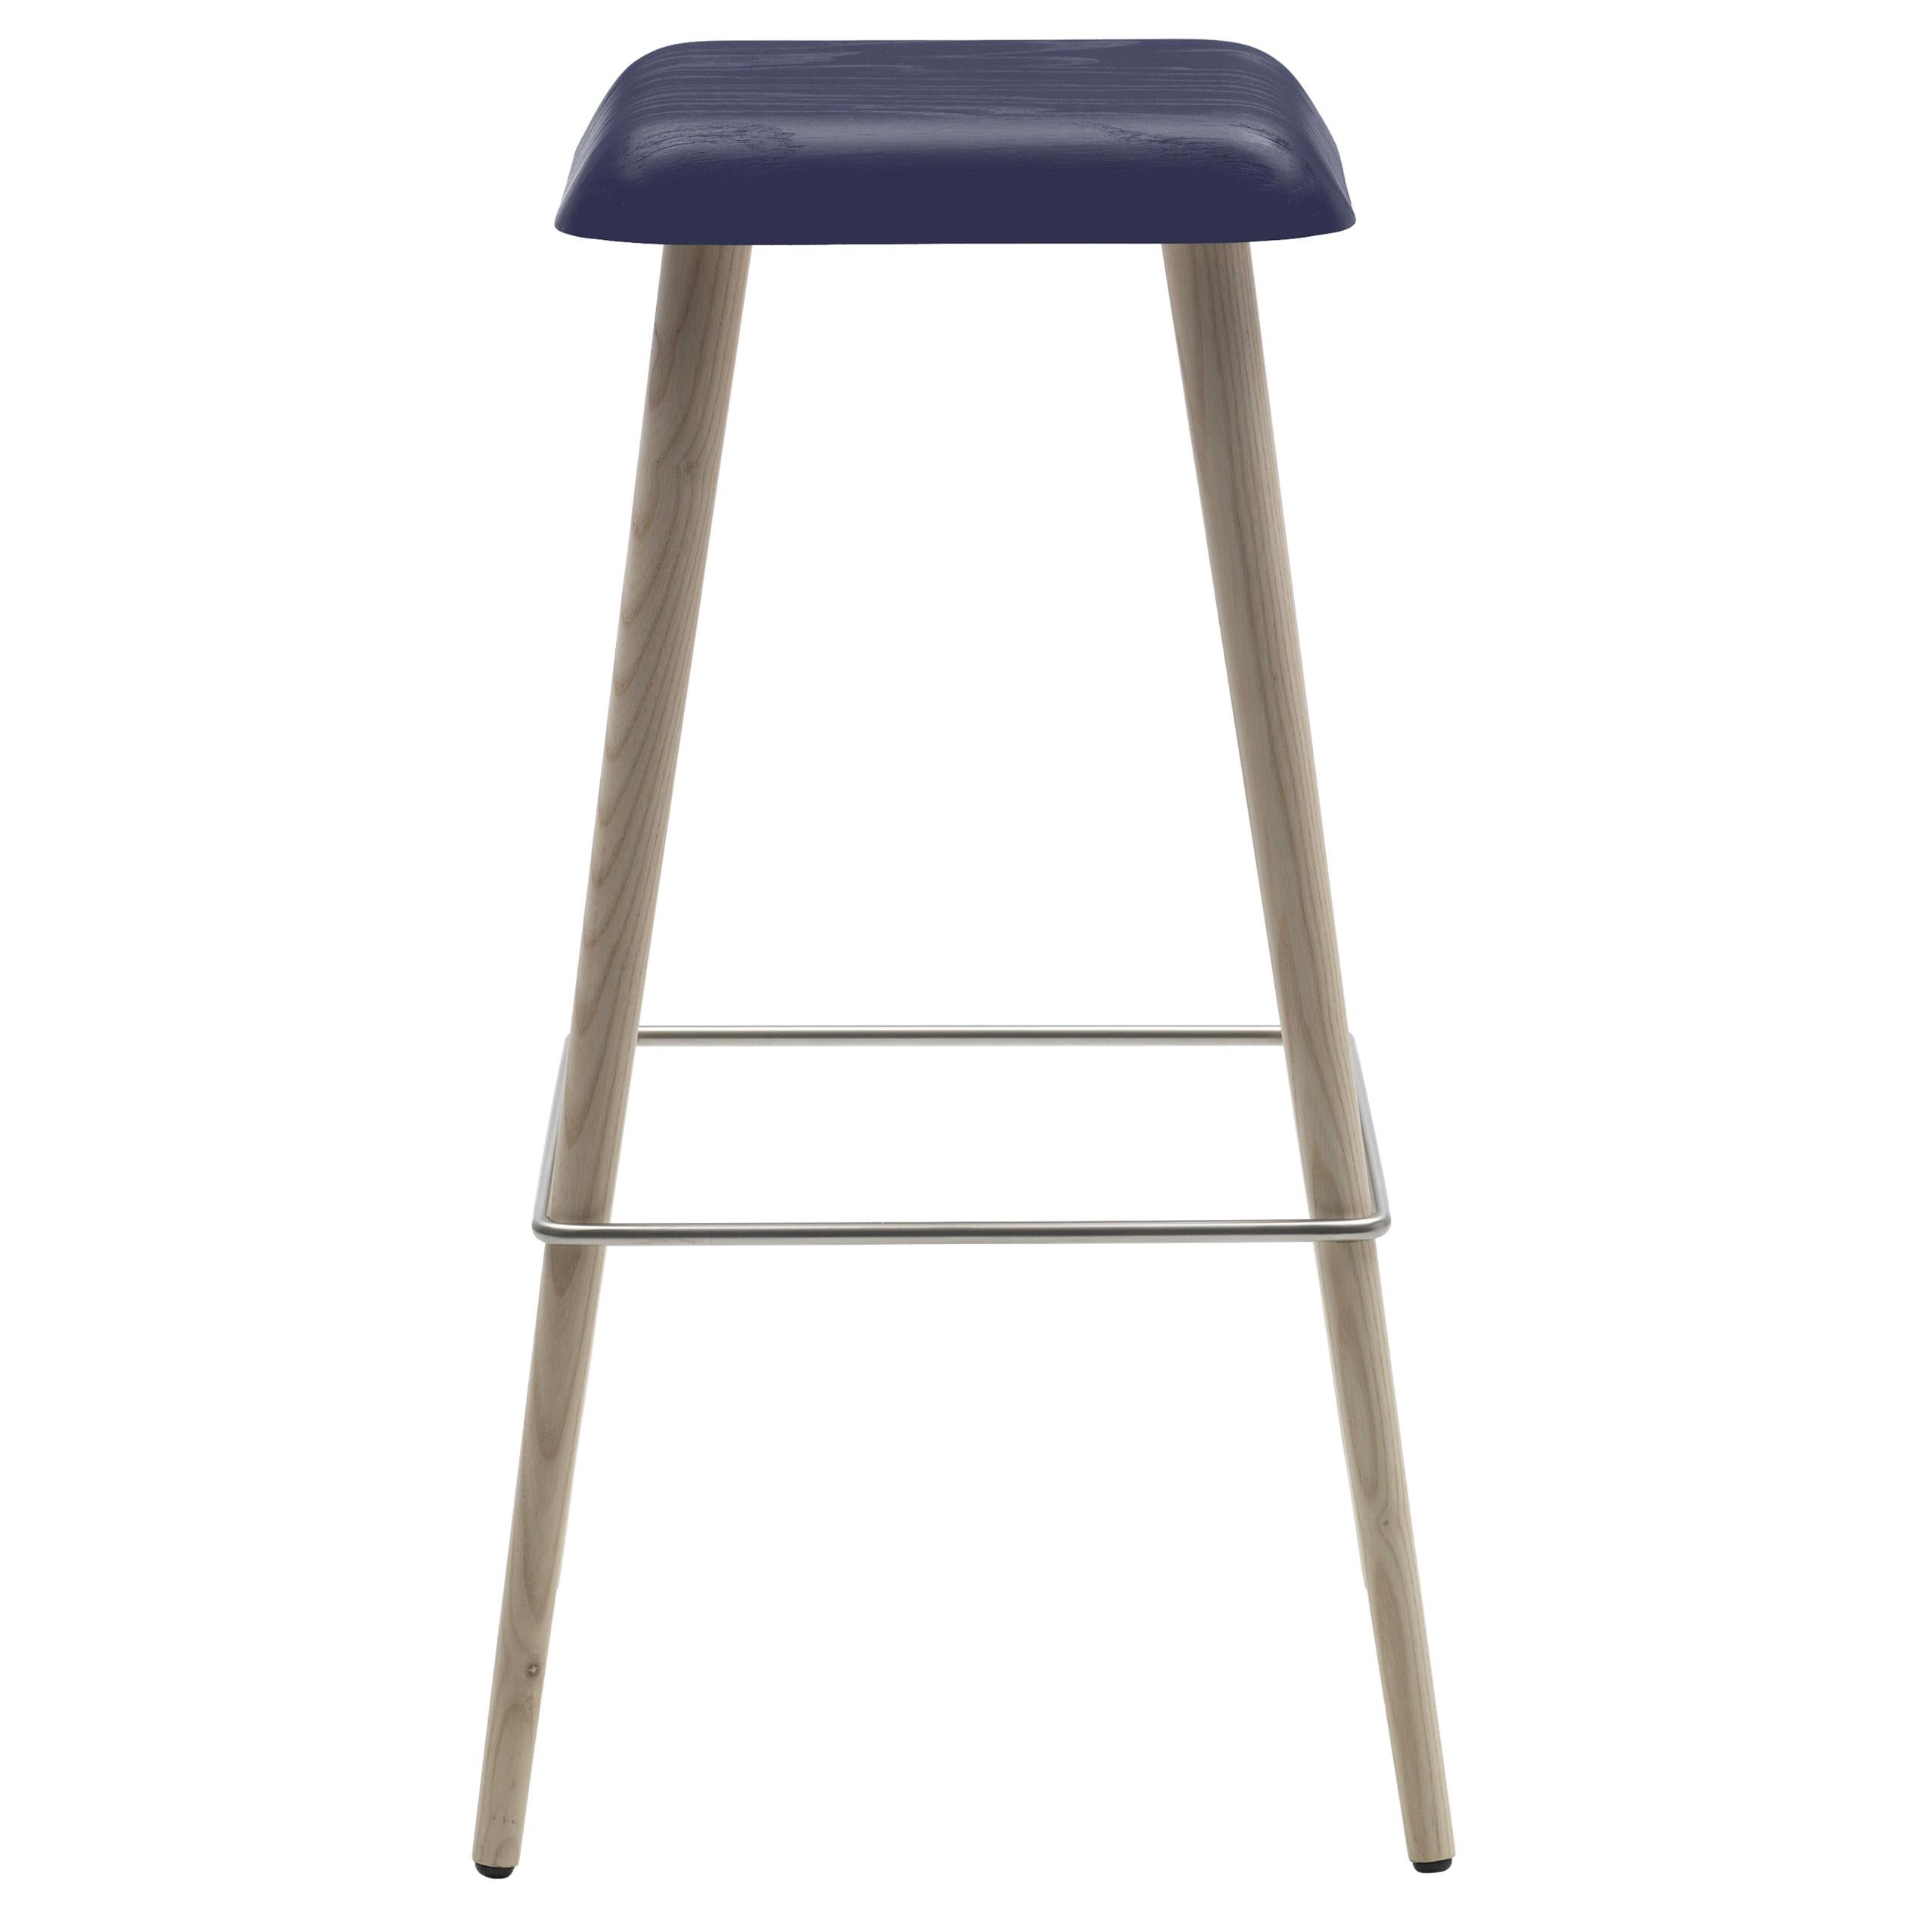 Blue (118_BLUE SHANGHAI ANILINE ASH) Martin Solem Large Daddy Longlegs Stool in Solid Ashwood for Cappellini